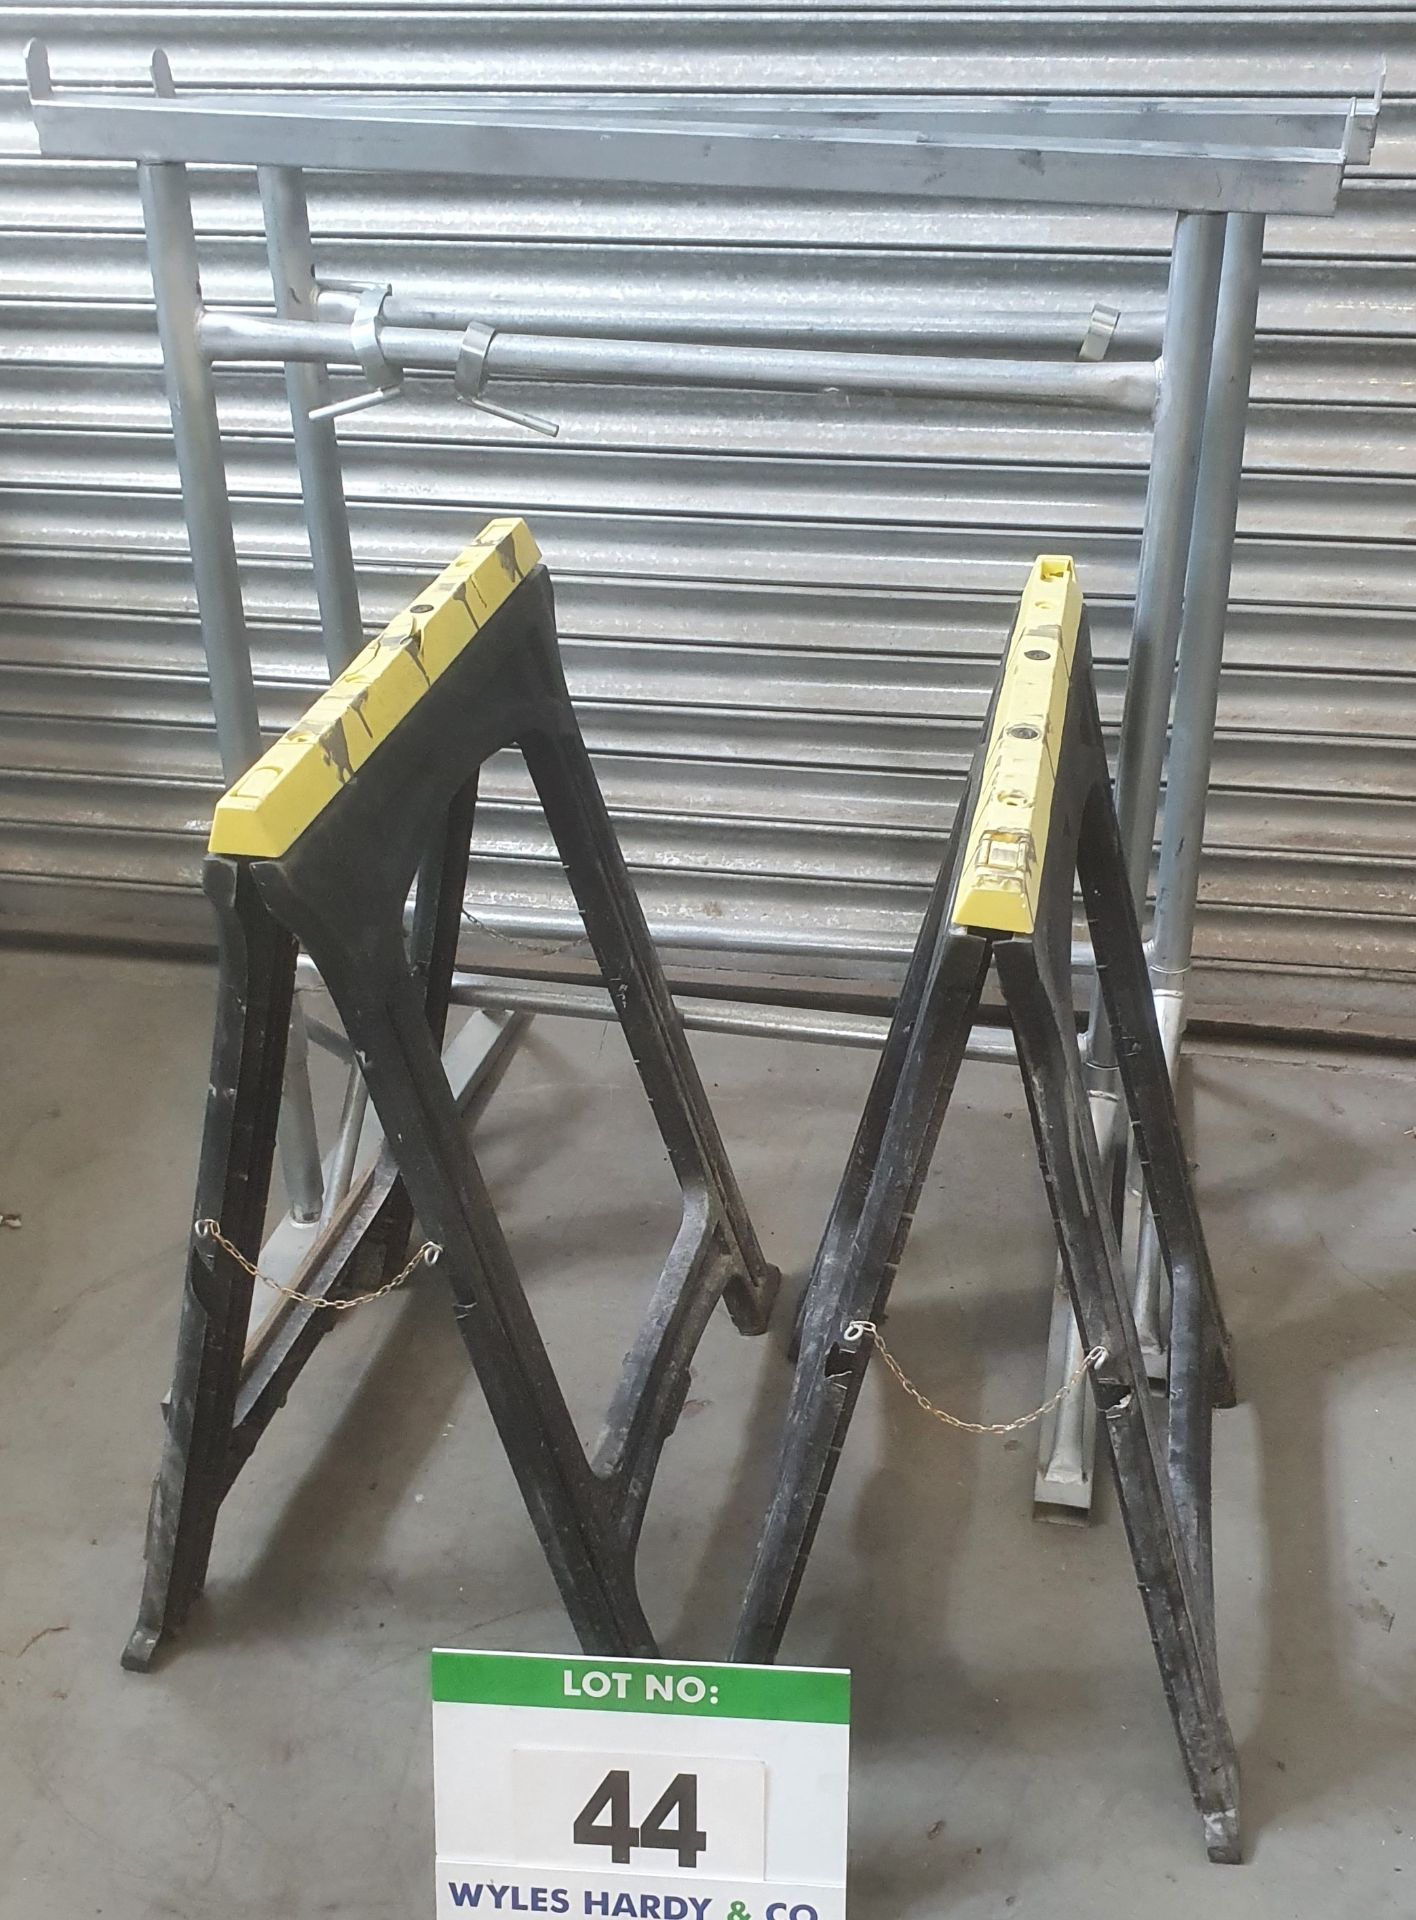 A Pair of 1020mm - 1170mm Galvanised Steel Adjustable Trestles and a Pair of Moulded Plastic